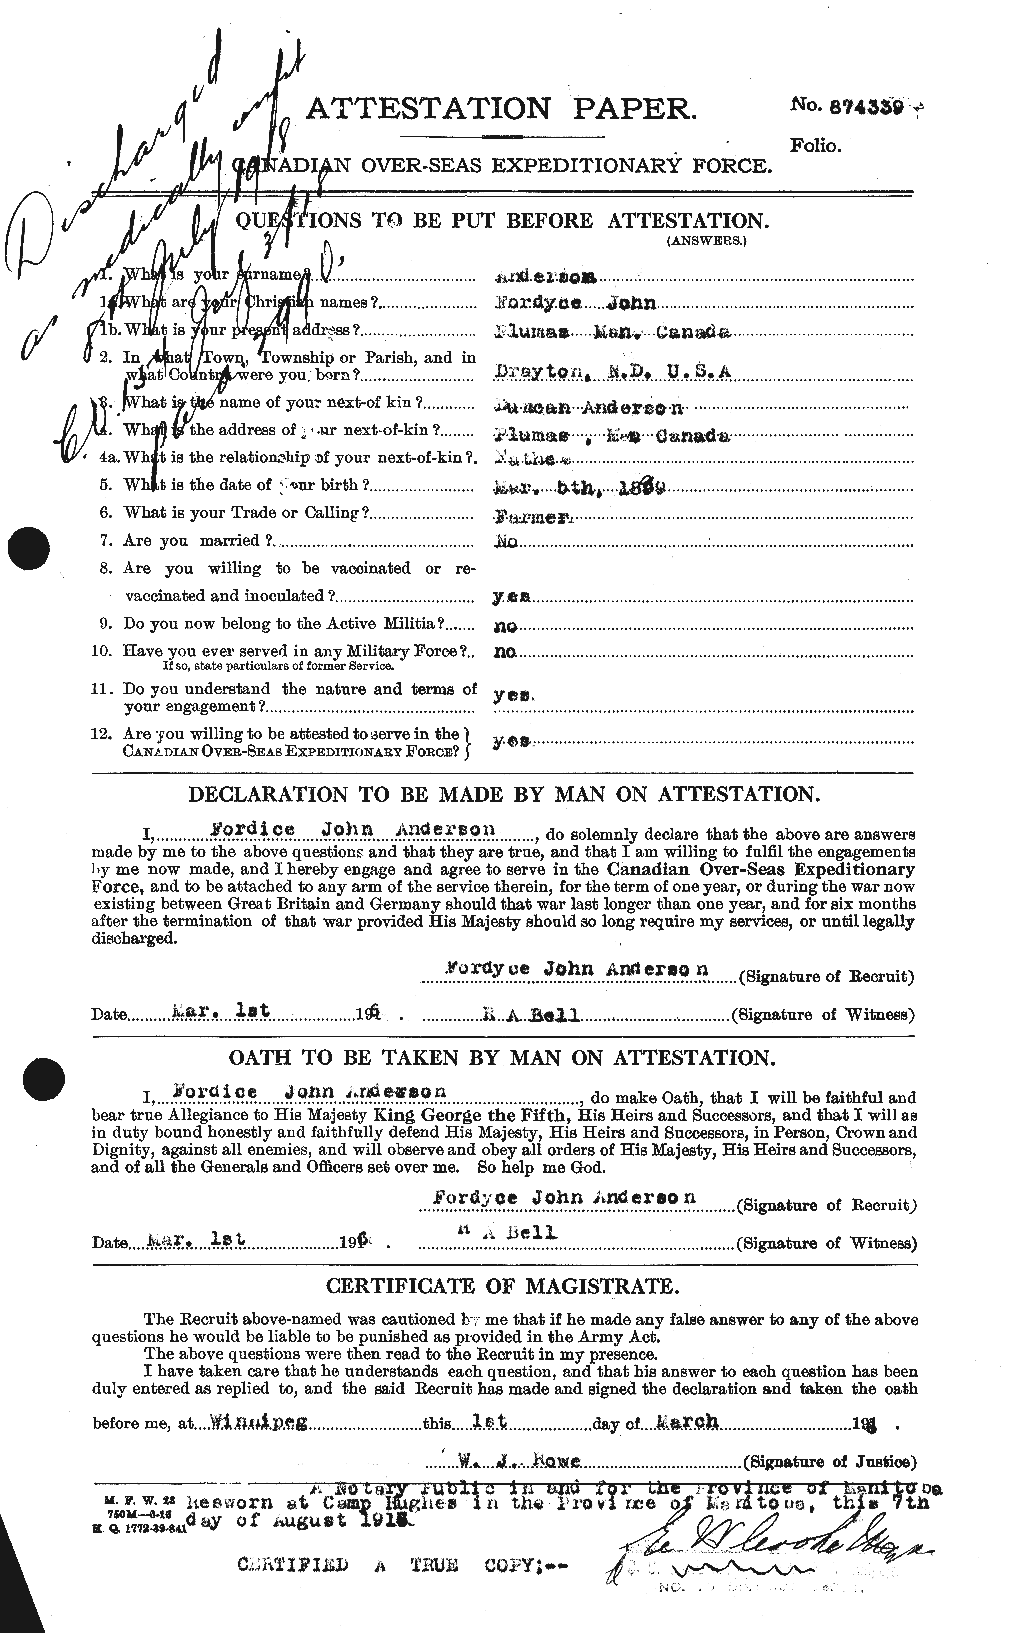 Personnel Records of the First World War - CEF 209868a